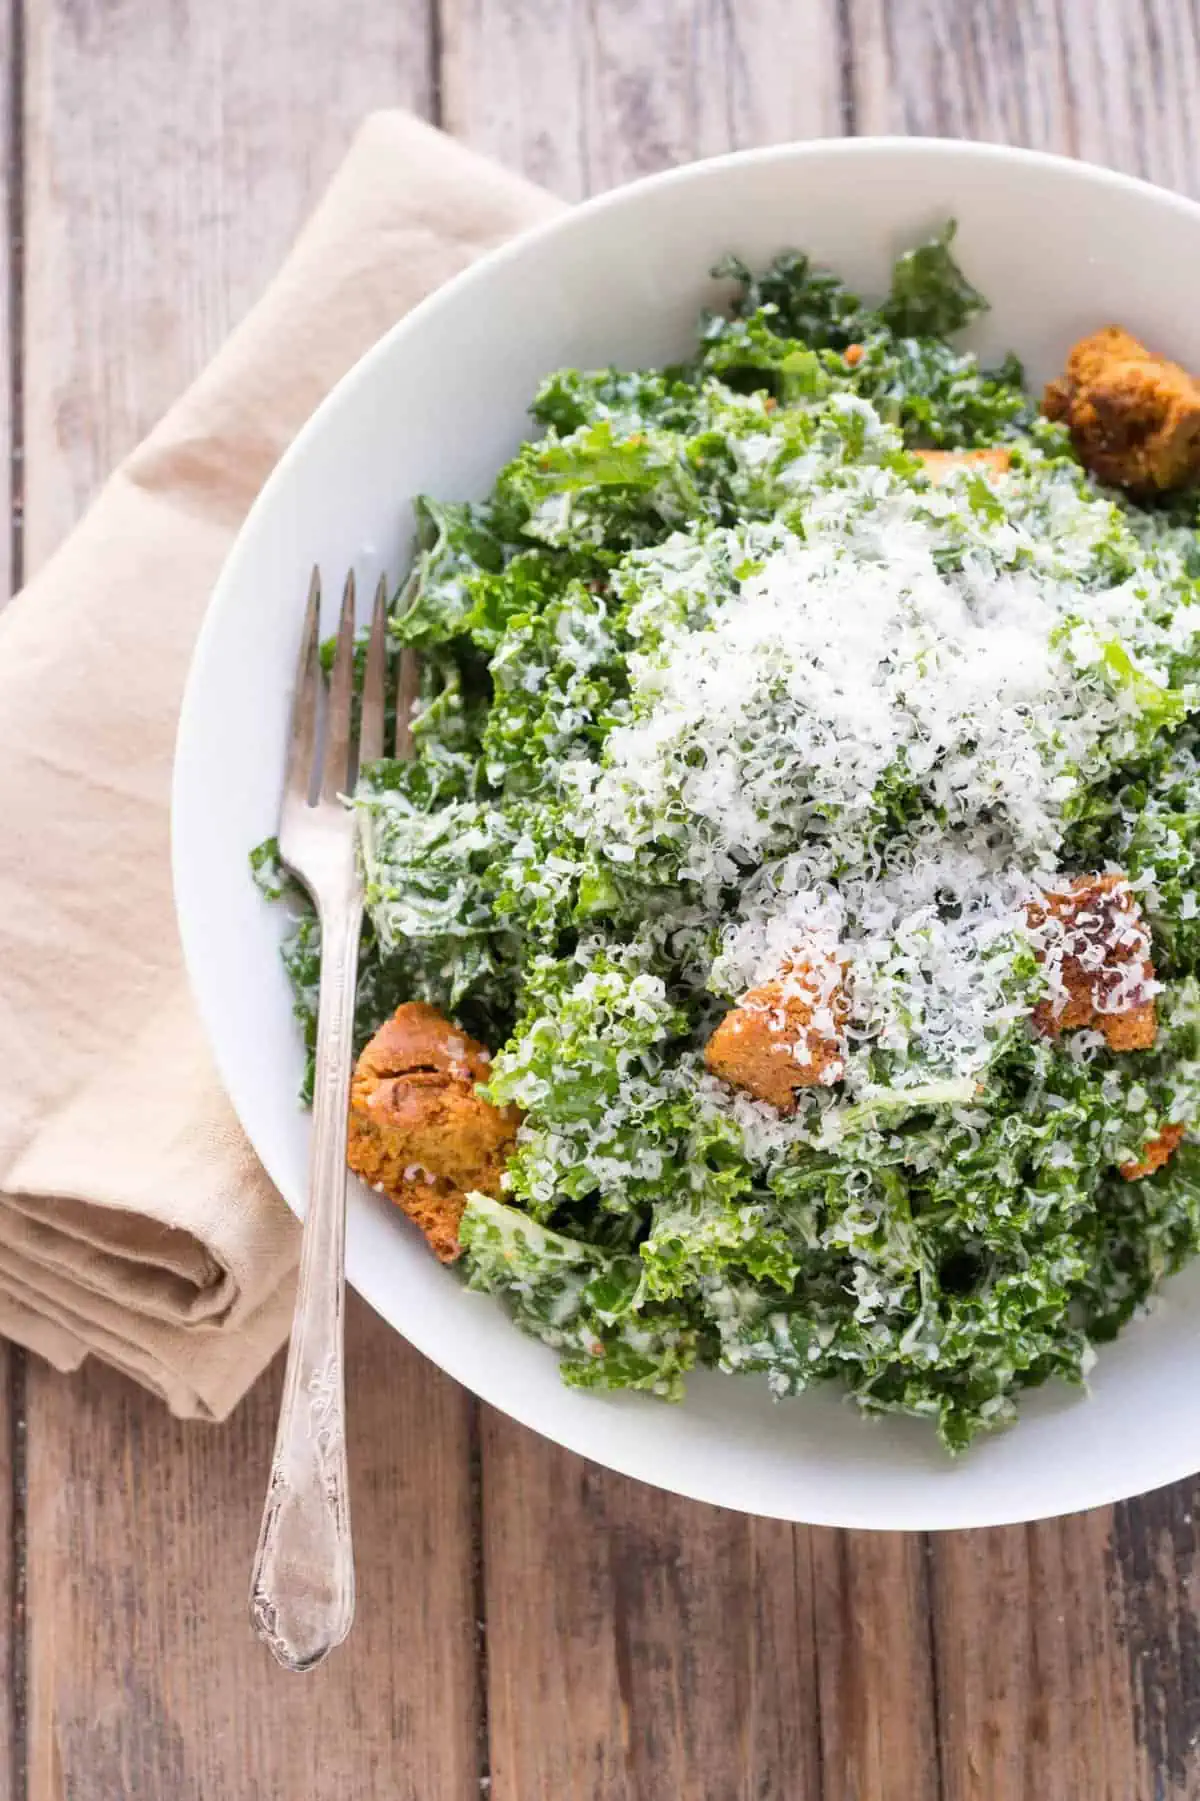 This easy recipe for Kale Caesar Salad is made with tender massaged kale and a traditional homemade Caesar dressing with anchovies.